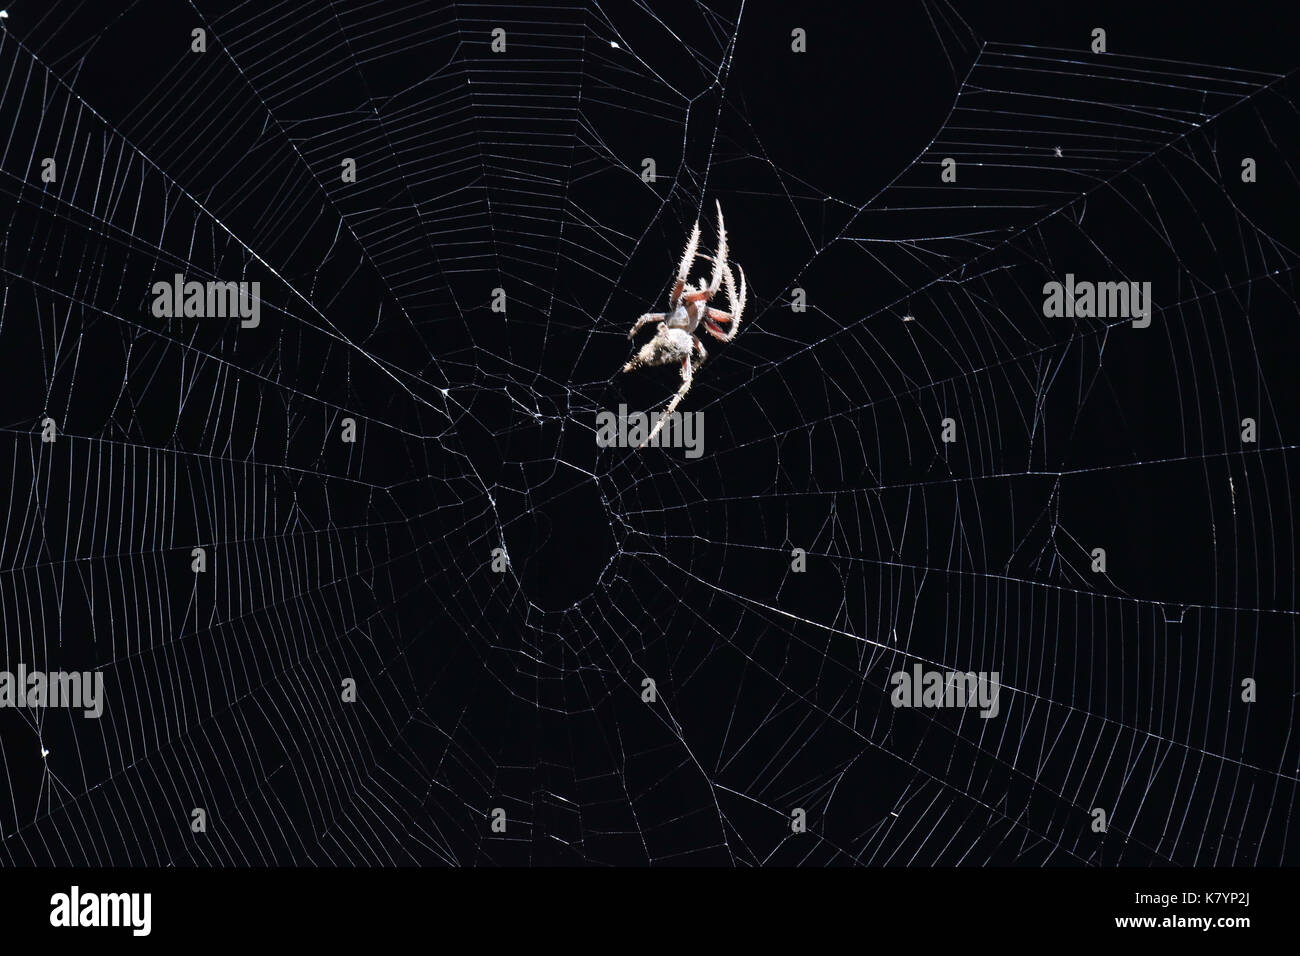 Big spider in a web against a black background Stock Photo